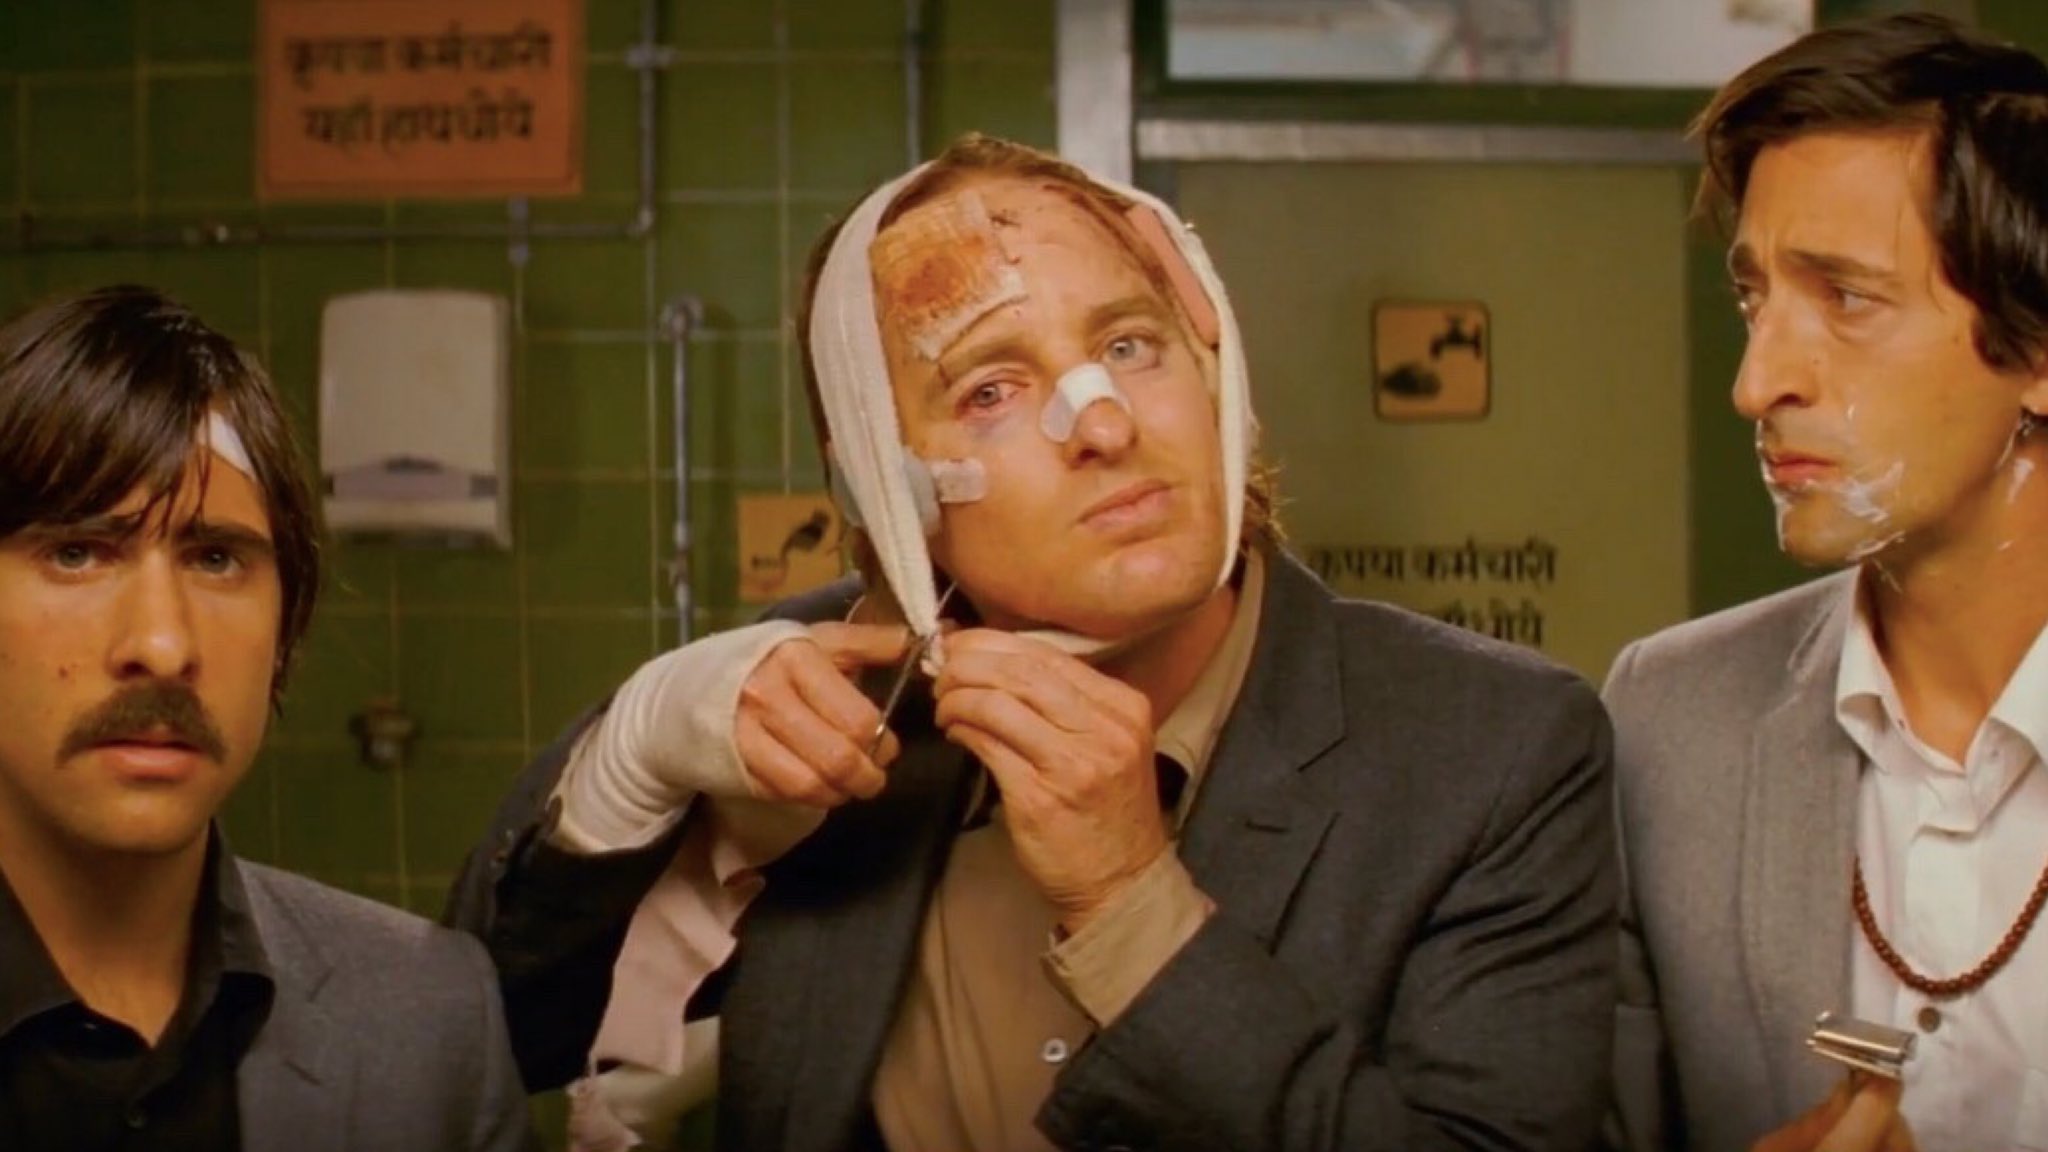 In The Darjeeling Limited, when Francis first says He (Brendan